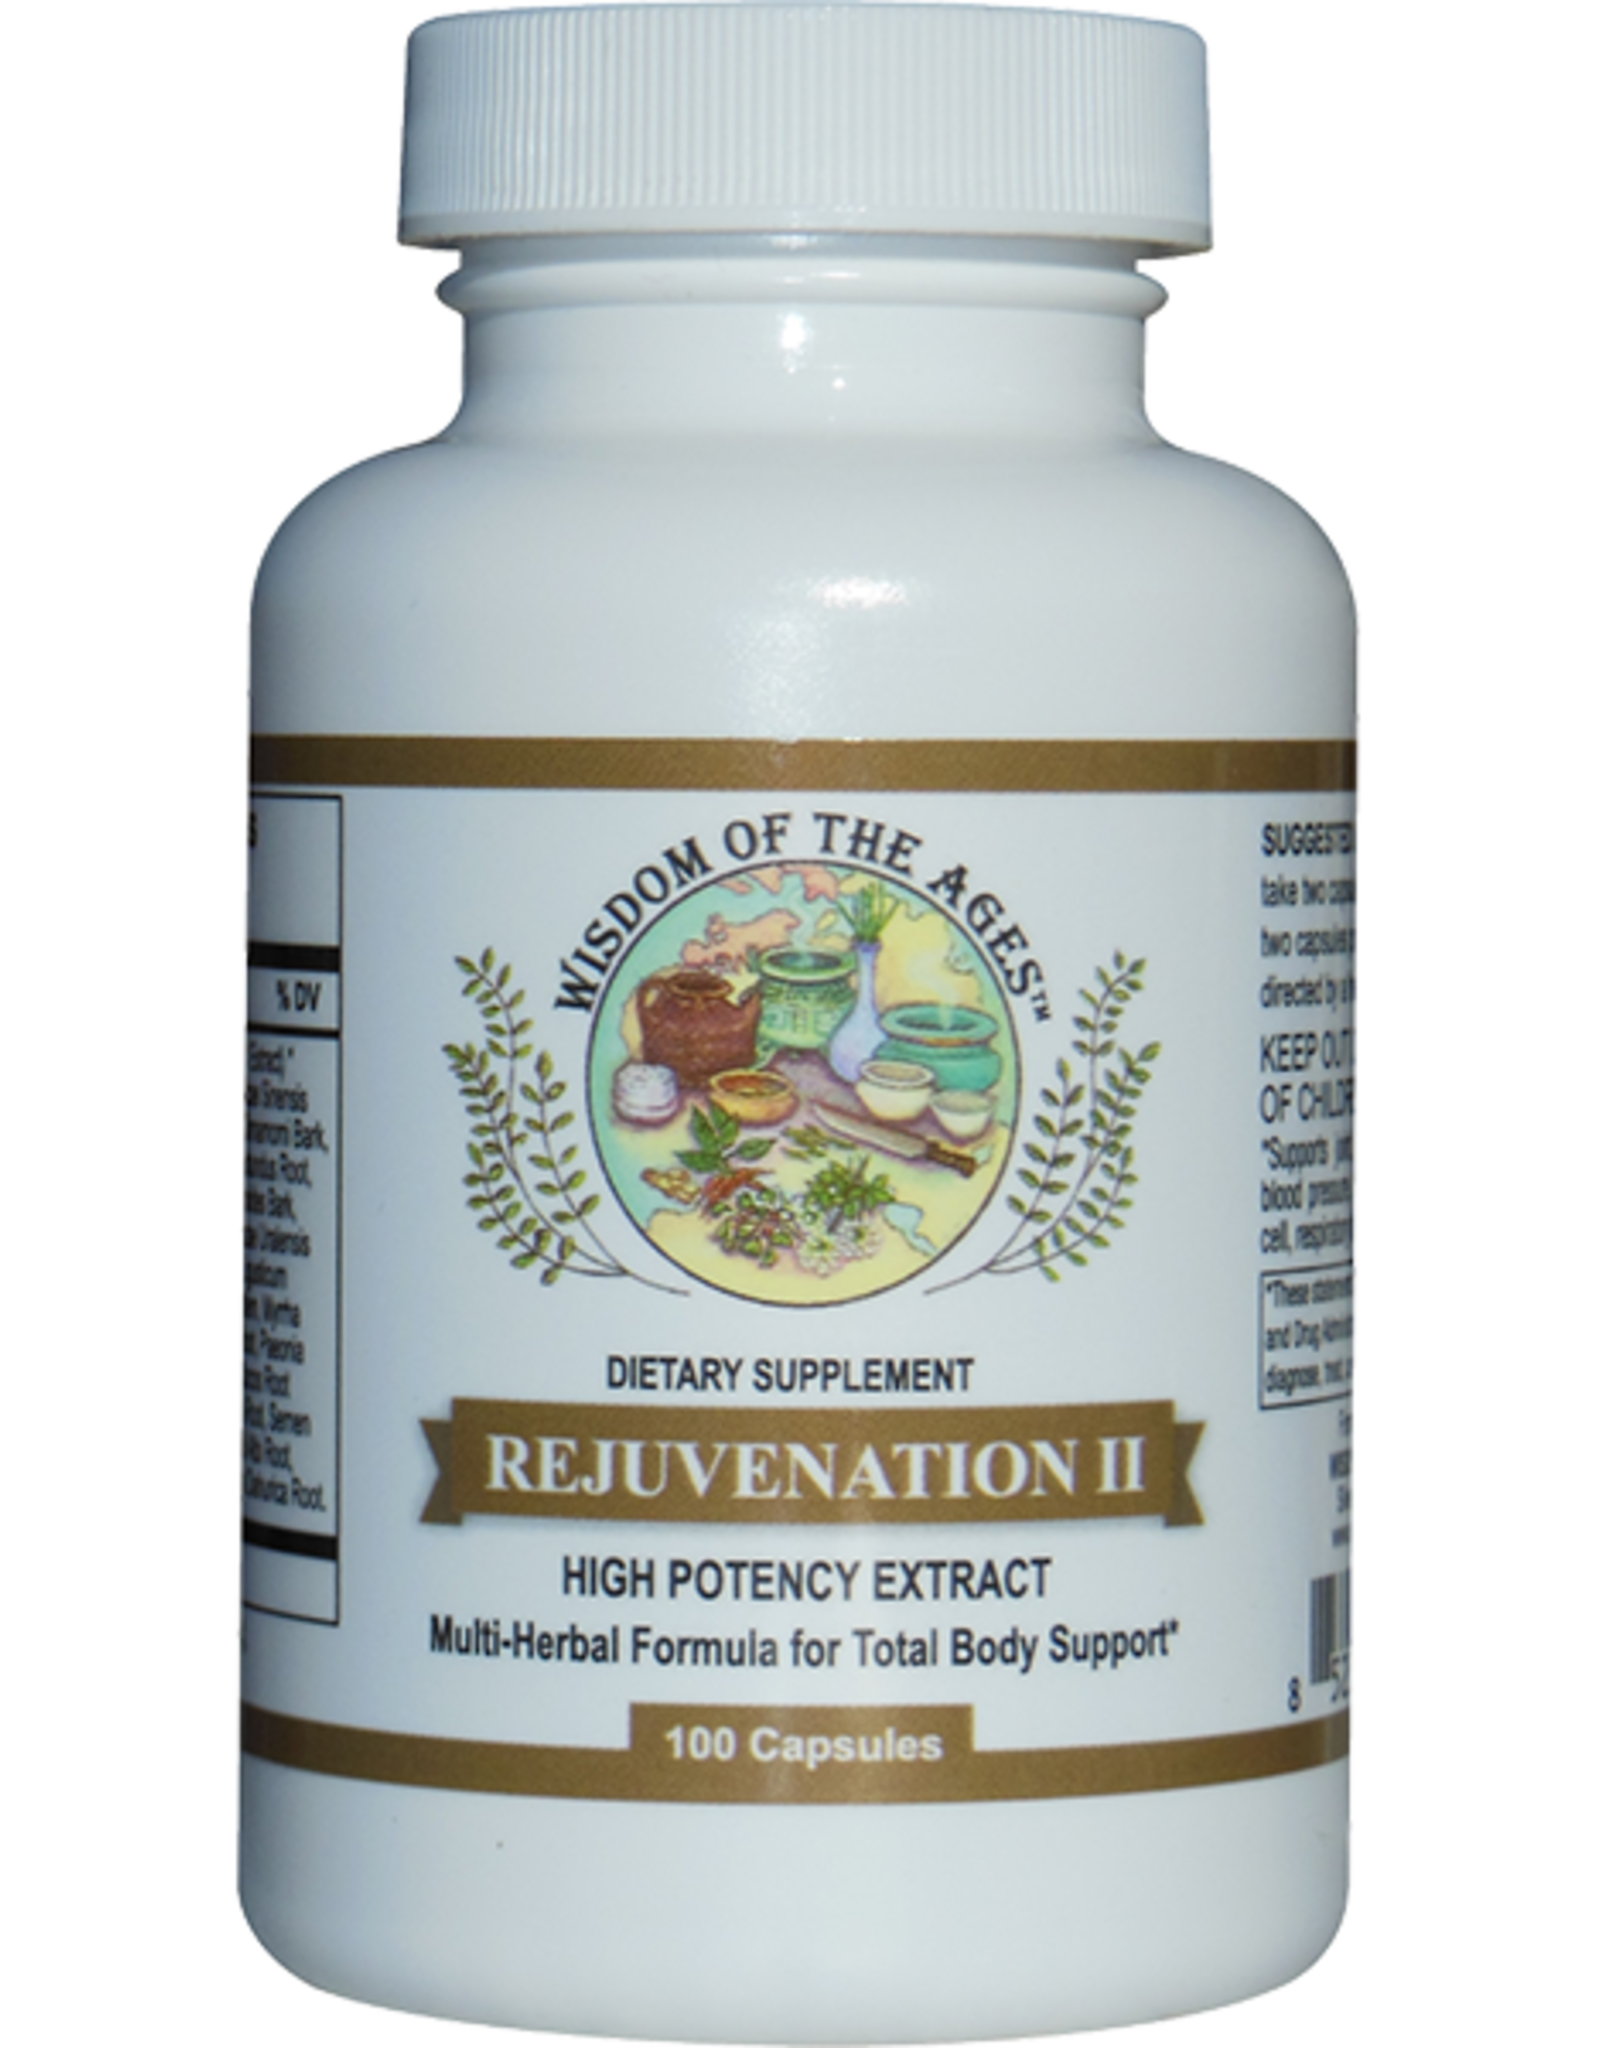 Wisdom of the Ages Rejuvenation II Capsules - Dietary Supplement